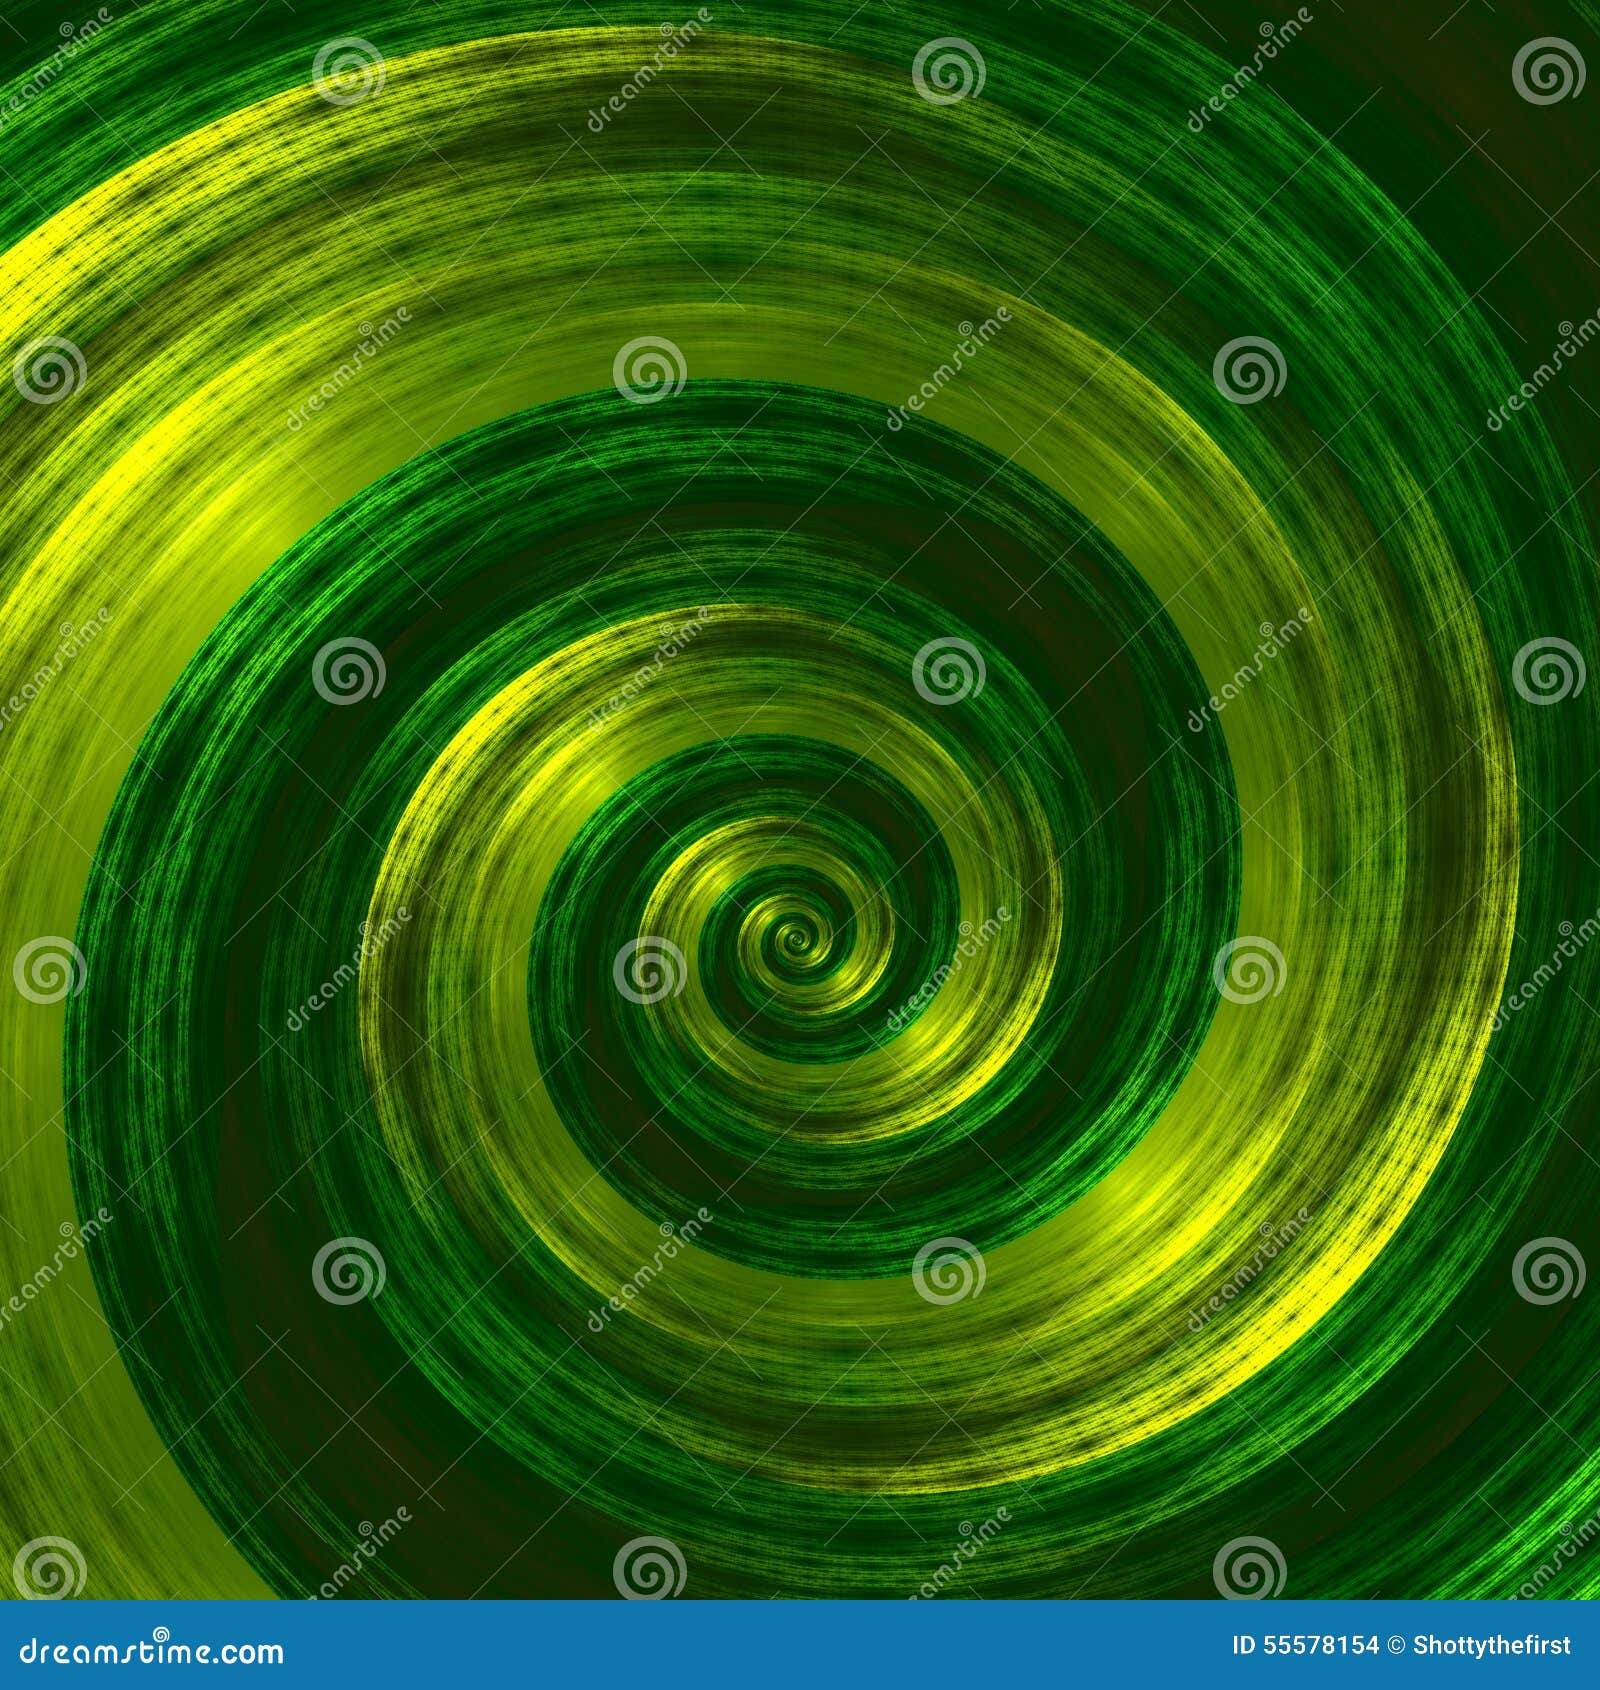 Creative Abstract Green Spiral Artwork. Beautiful Background